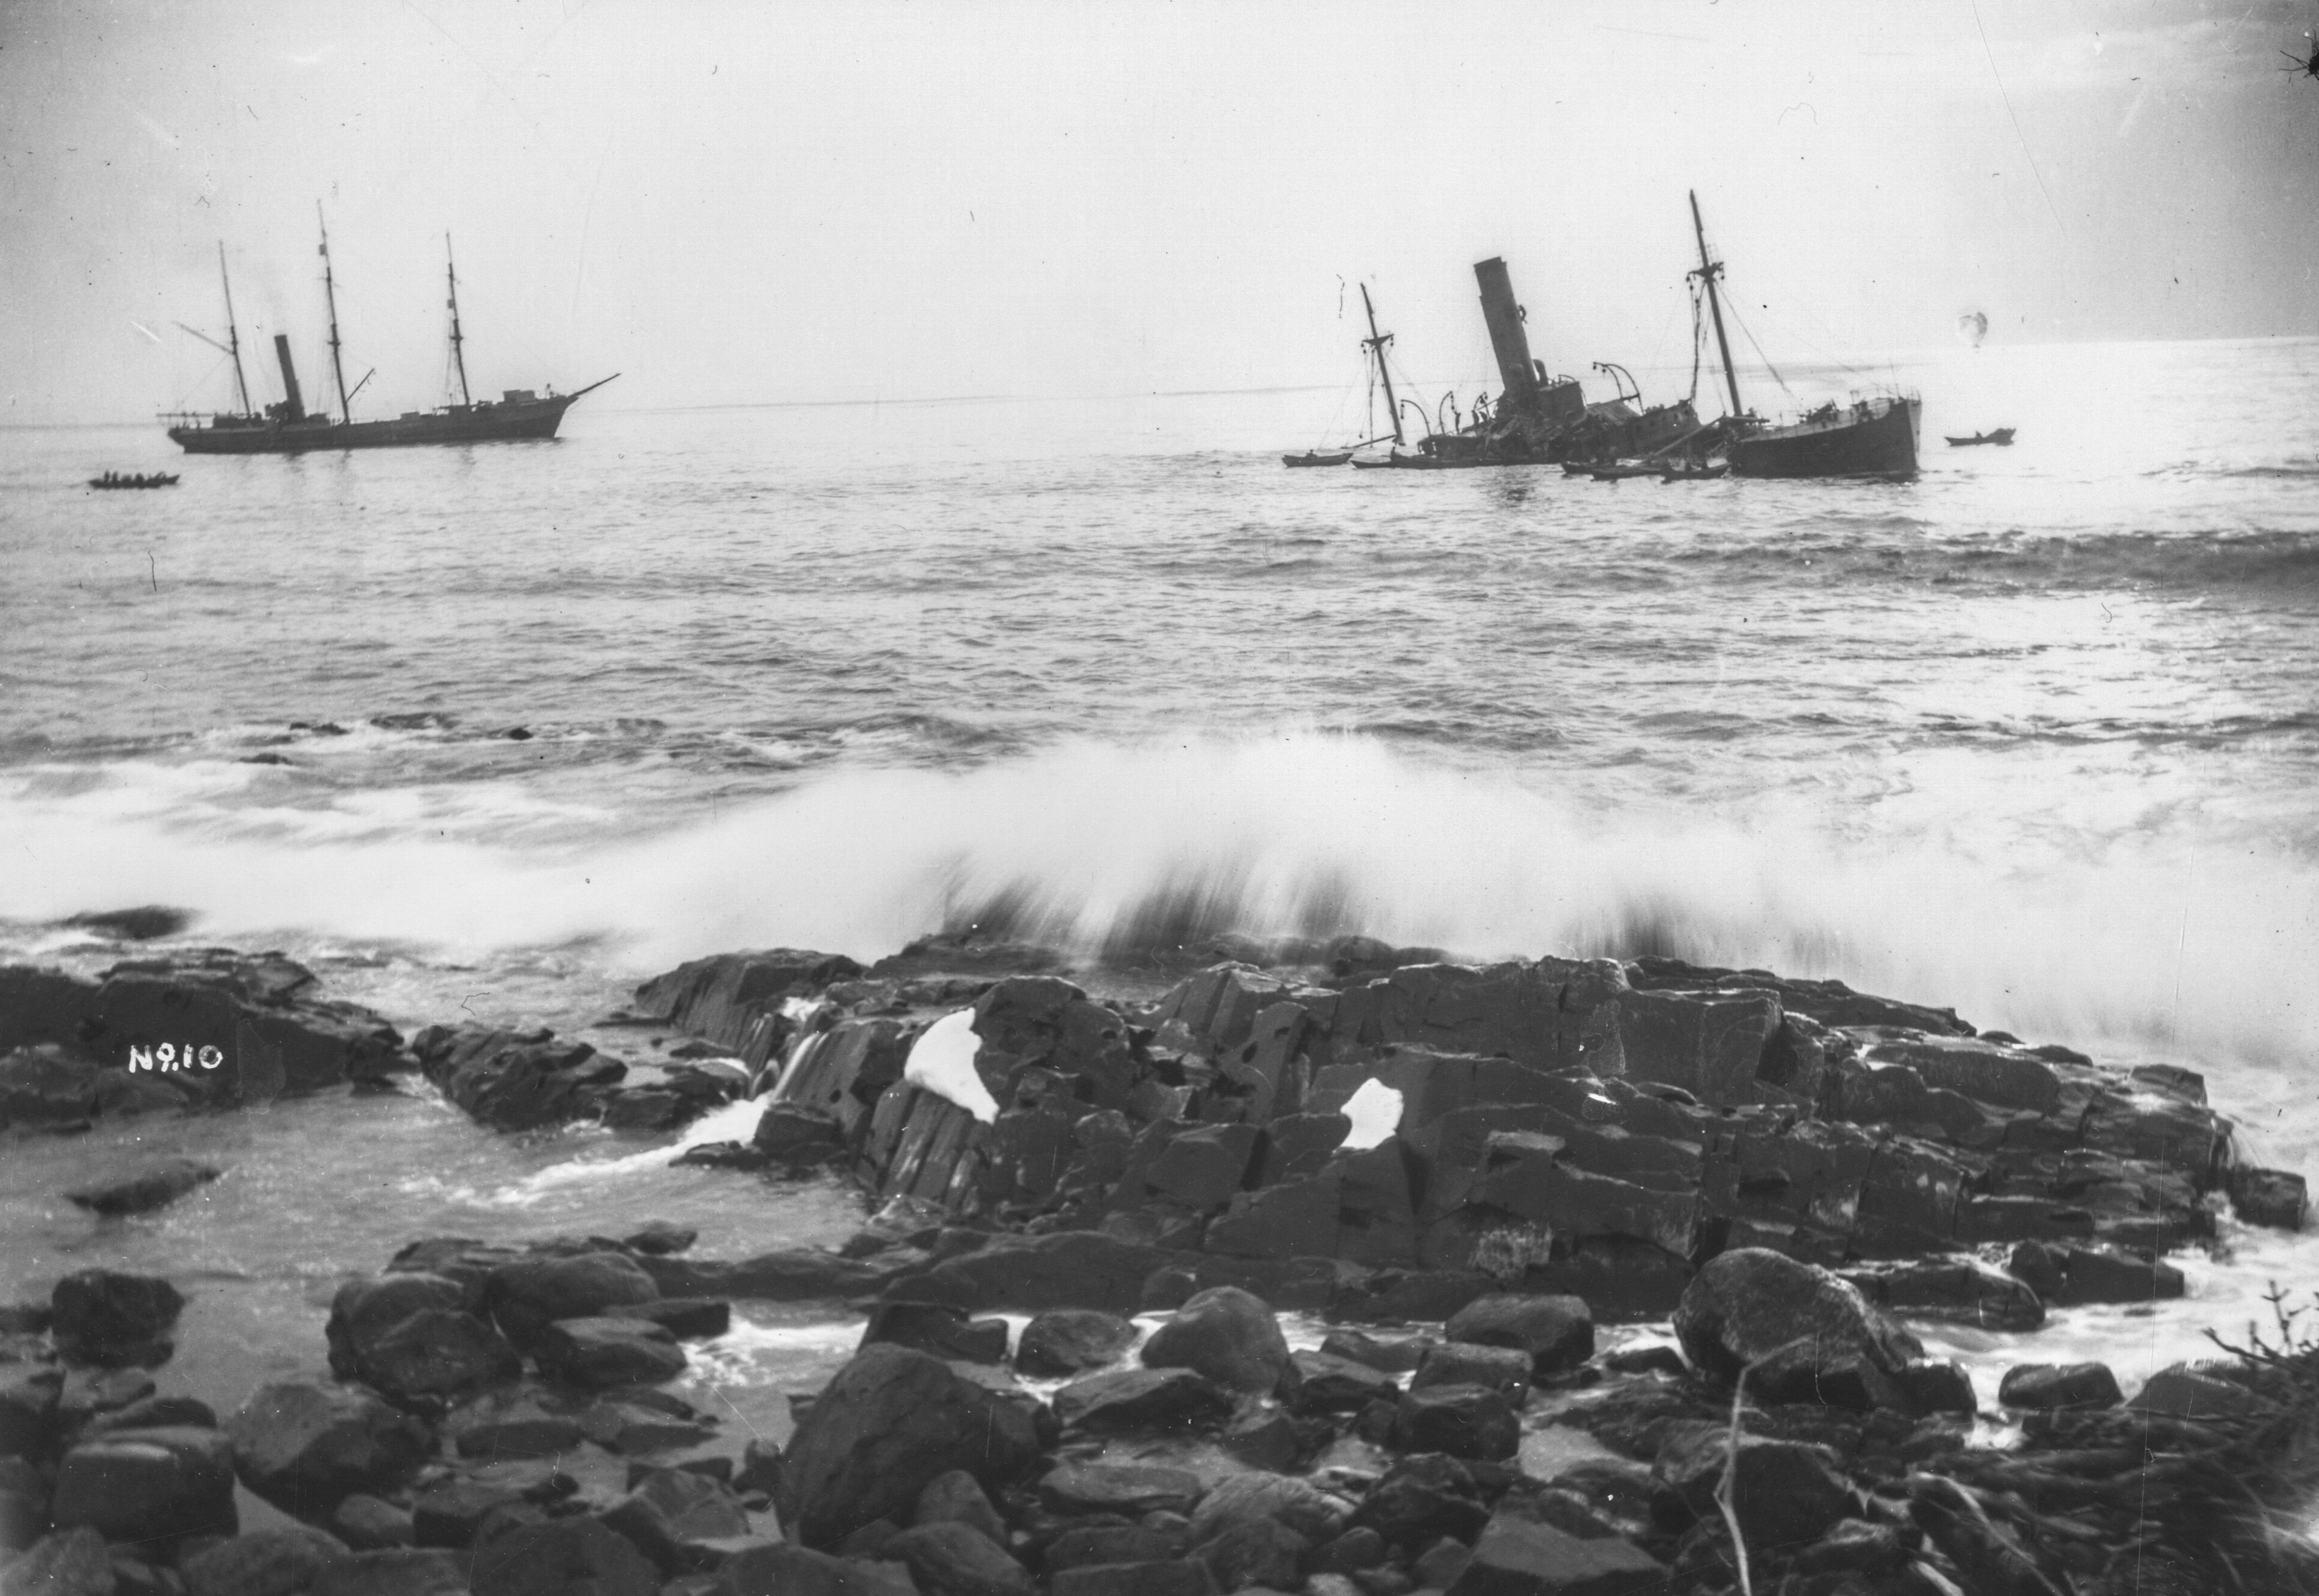 Black and white archival photograph of large passenger liner ship, the SS Florizel, run aground in the ocean just offshore from rocky beach. Seven rescue boats can be seen around the Florizel. Large rescue ship can be seen to the left of Florizel with two smaller rescue boats to the left of large ship.